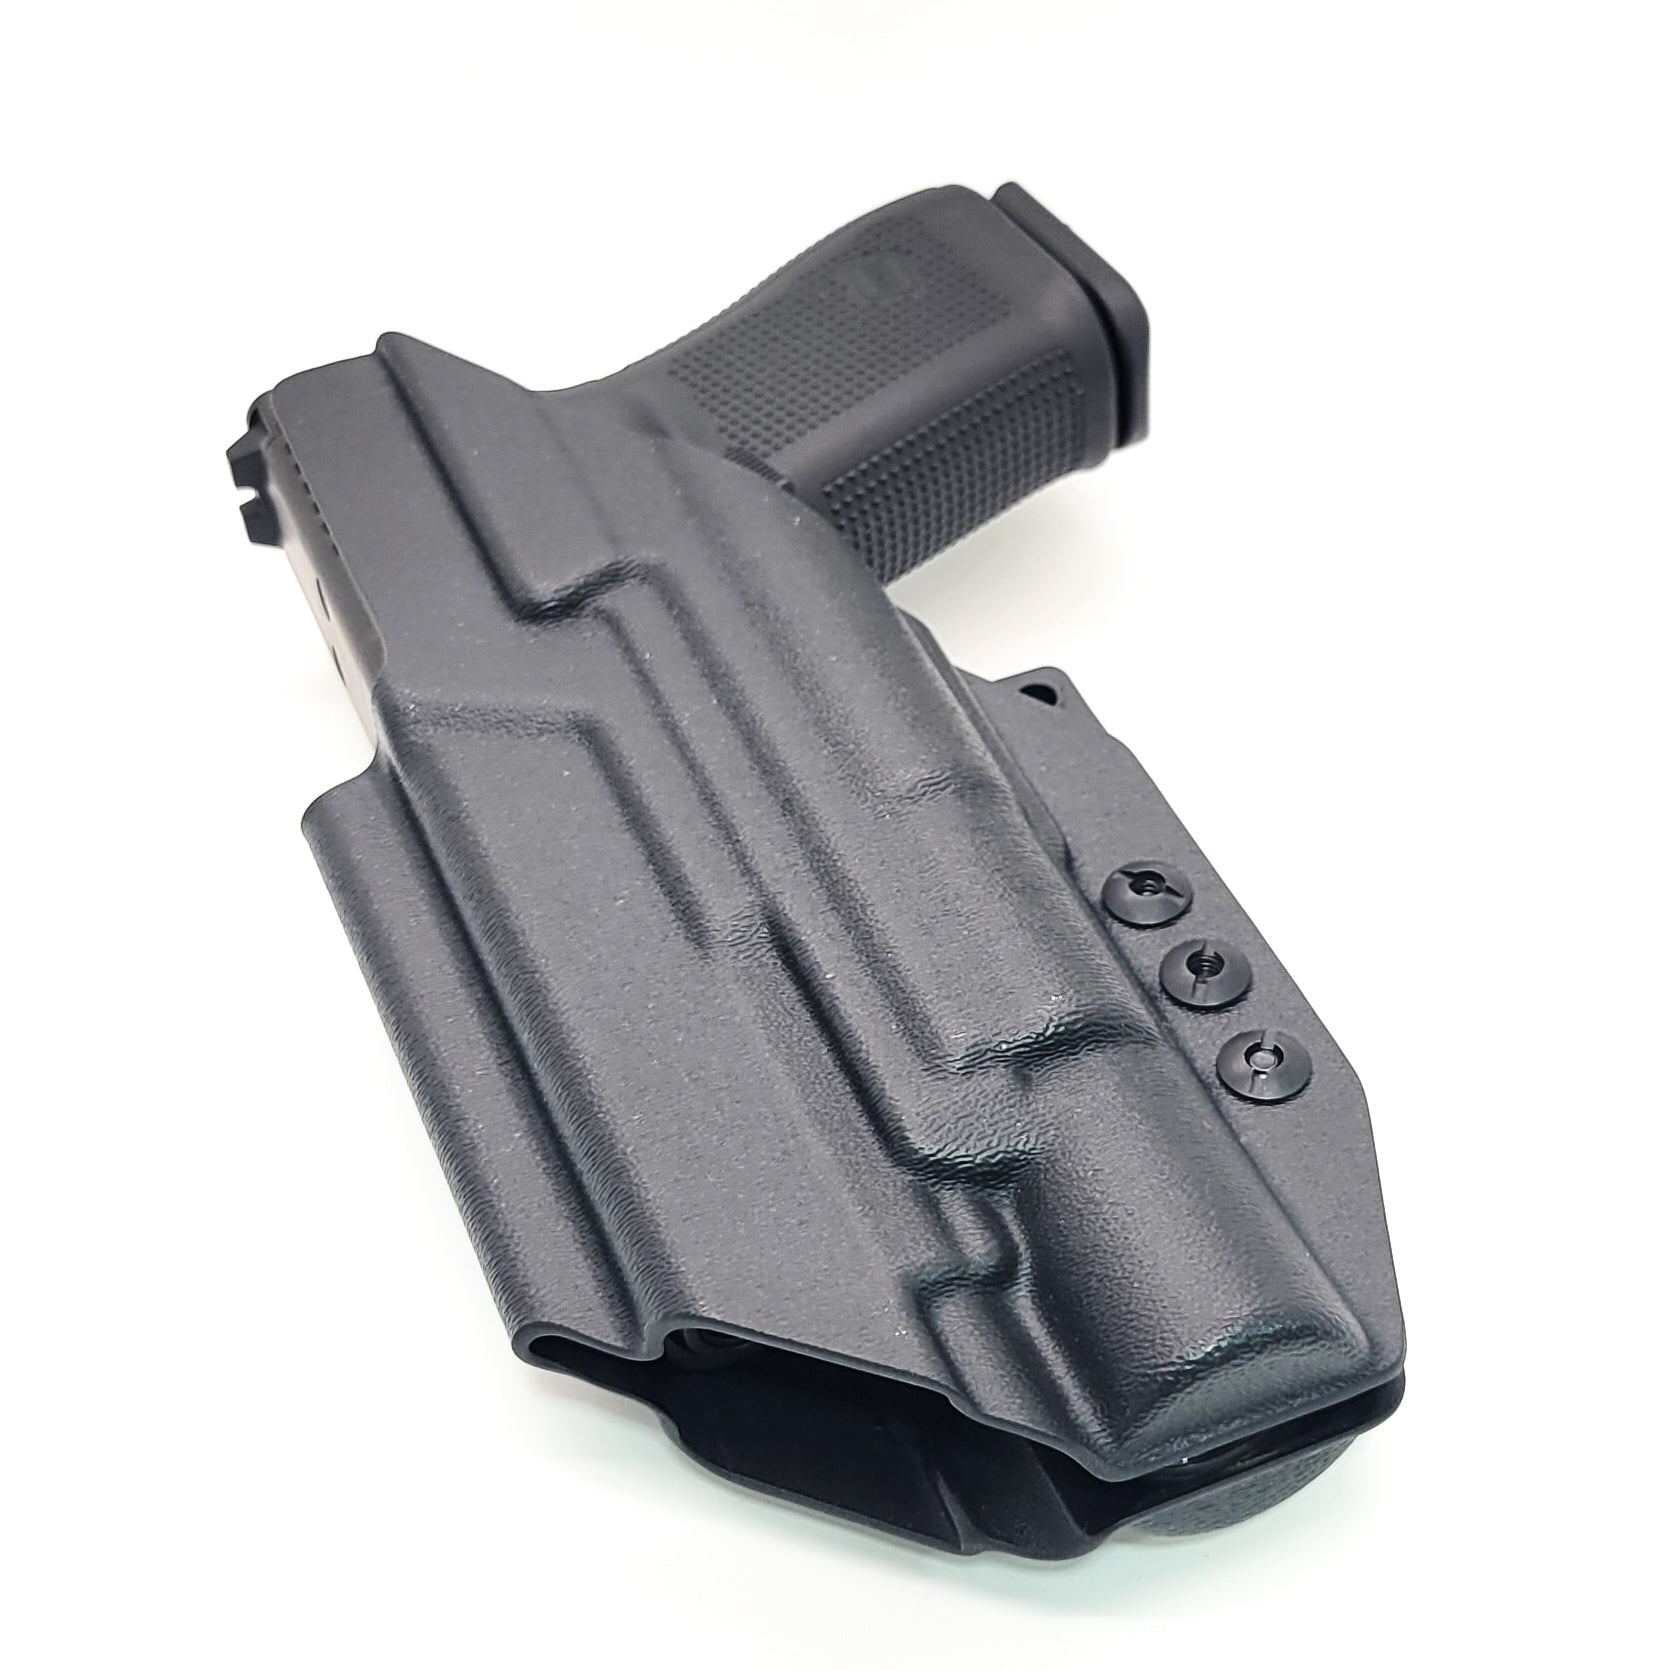 For the best, IWB AIWB Inside Waistband Taco Style Holster designed to fit the Glock 19 Gen 5 with the Surefire X300U A or B X300U-A or X300U-B weapon-mounted light, shop Four Brothers Holsters. Adjustable retention and ride height, high sweat guard, minimum material for reduced printing. Made in the USA. 